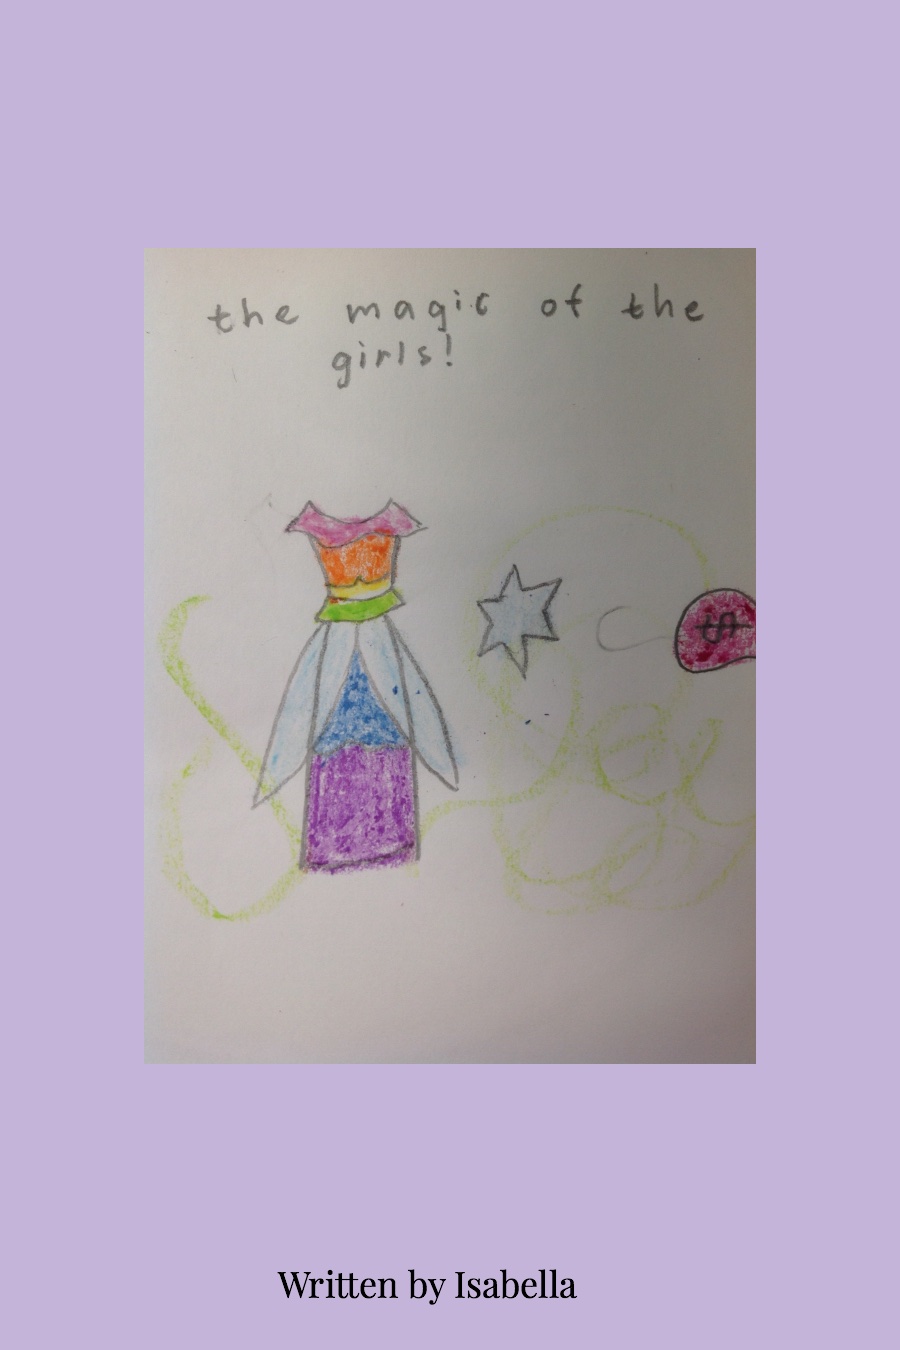 The Magic of the Girls! by Isabella L